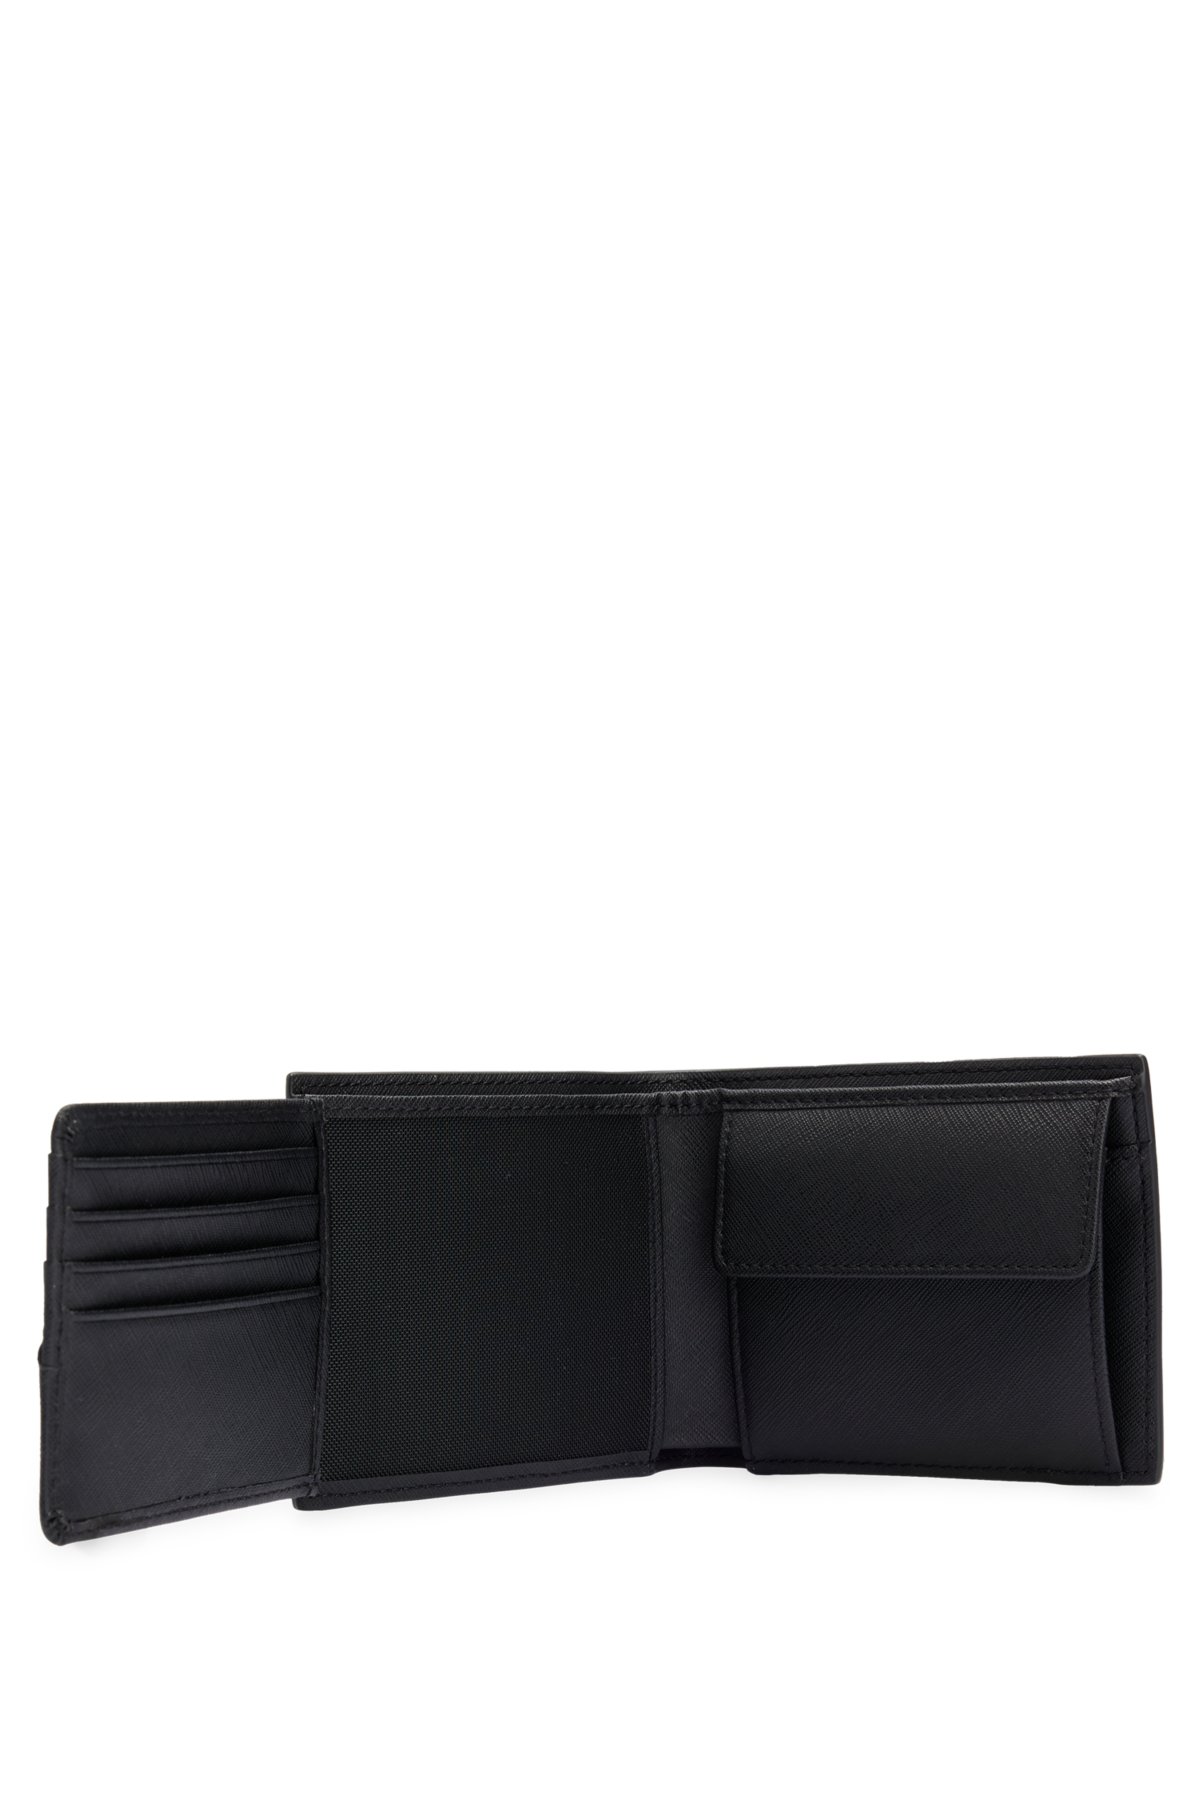 Structured trifold wallet with signature trims, Black